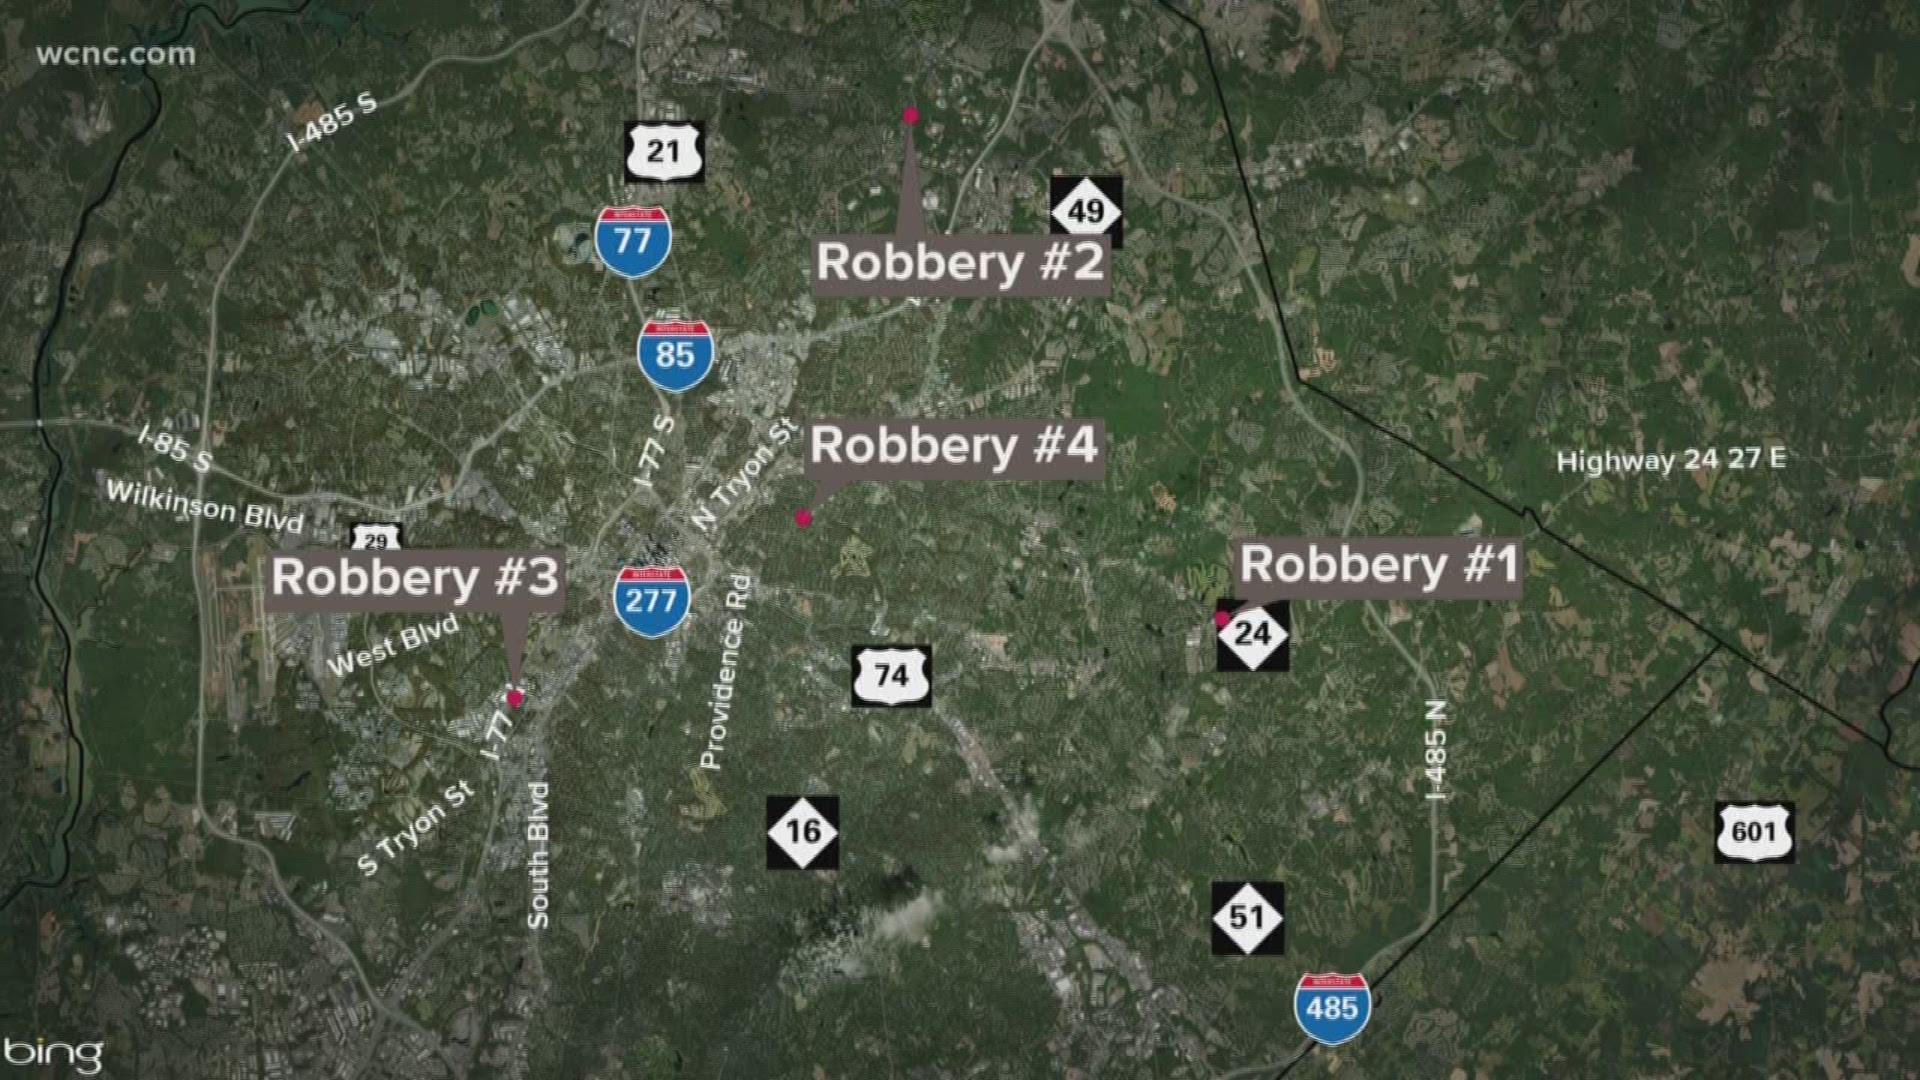 Police are still trying to figure out if the robberies spanning the city are connected. The first happened around 1 a.m. and the last around 5 a.m.